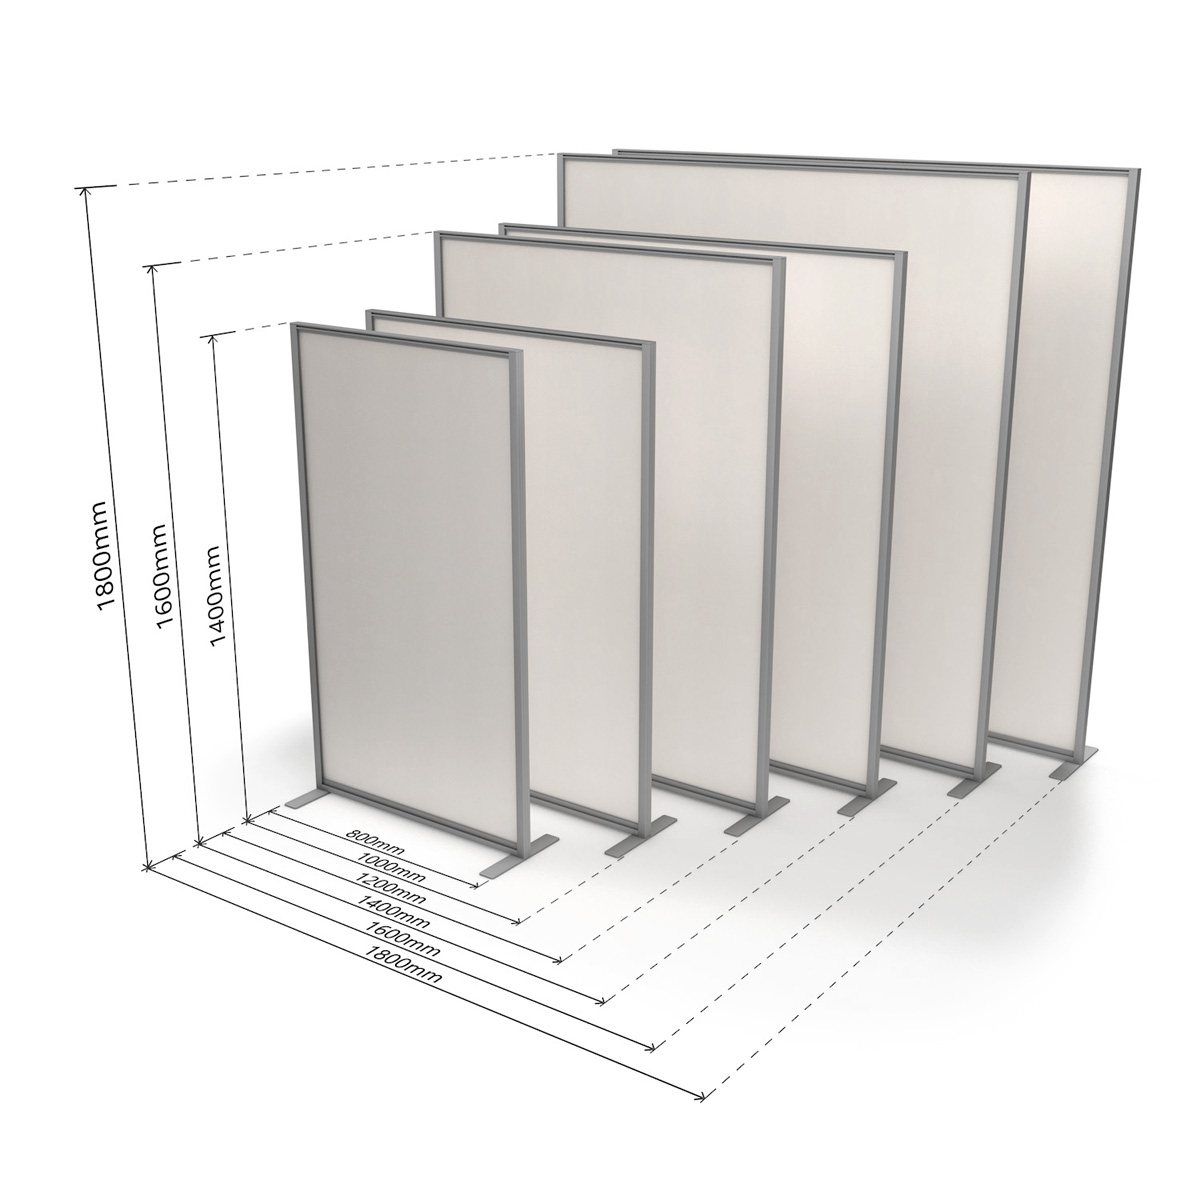 Dimensions of FRONTIER® Medical Screens With Anti-Microbial, Medical Grade Vinyl